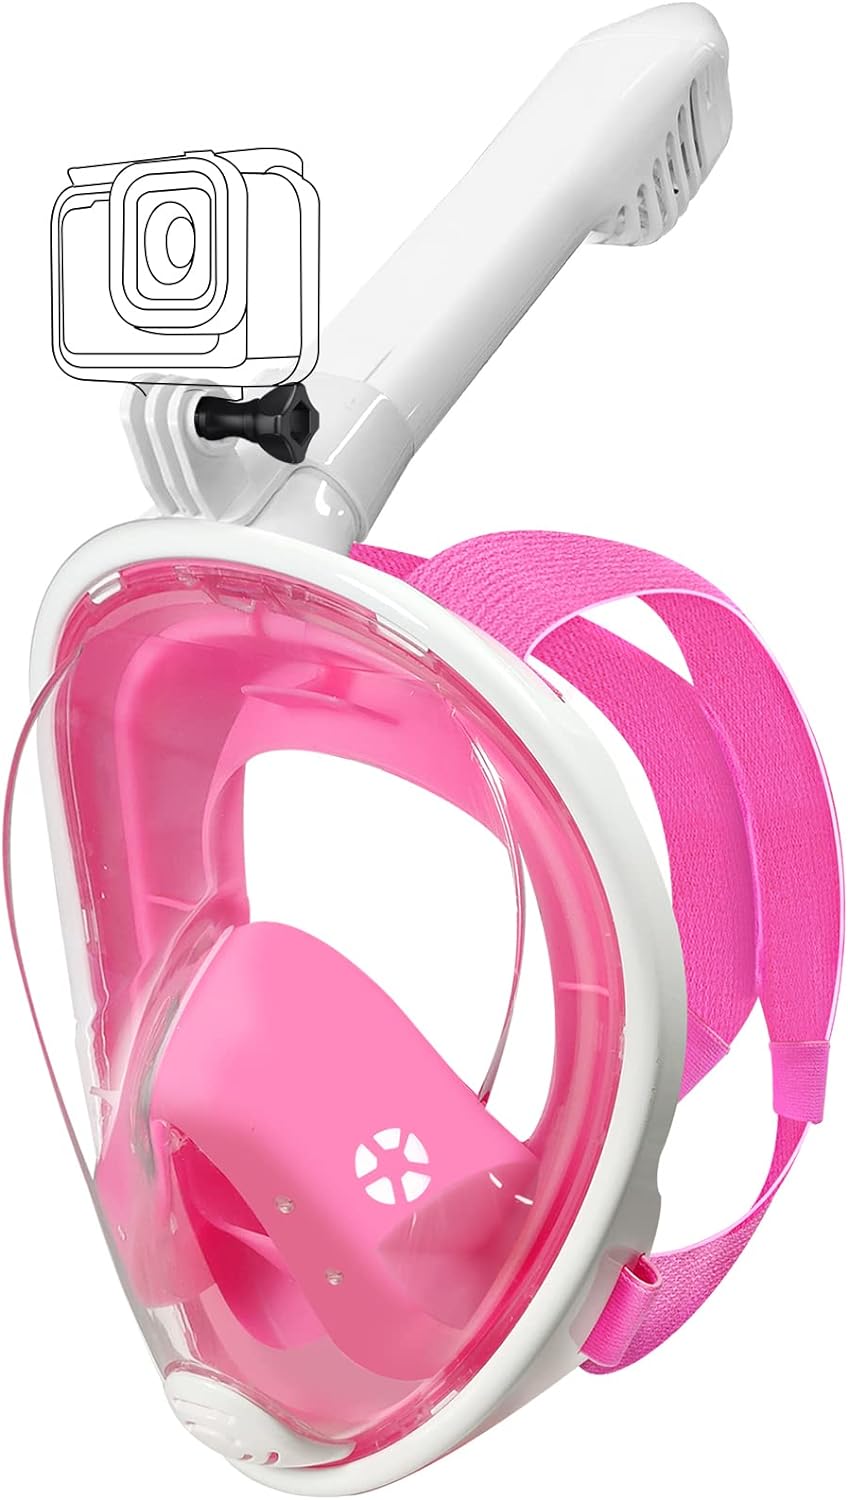 Exclusive Offer: ROCONTRIP Snorkeling Mask, 20% Off! Limited Stock!